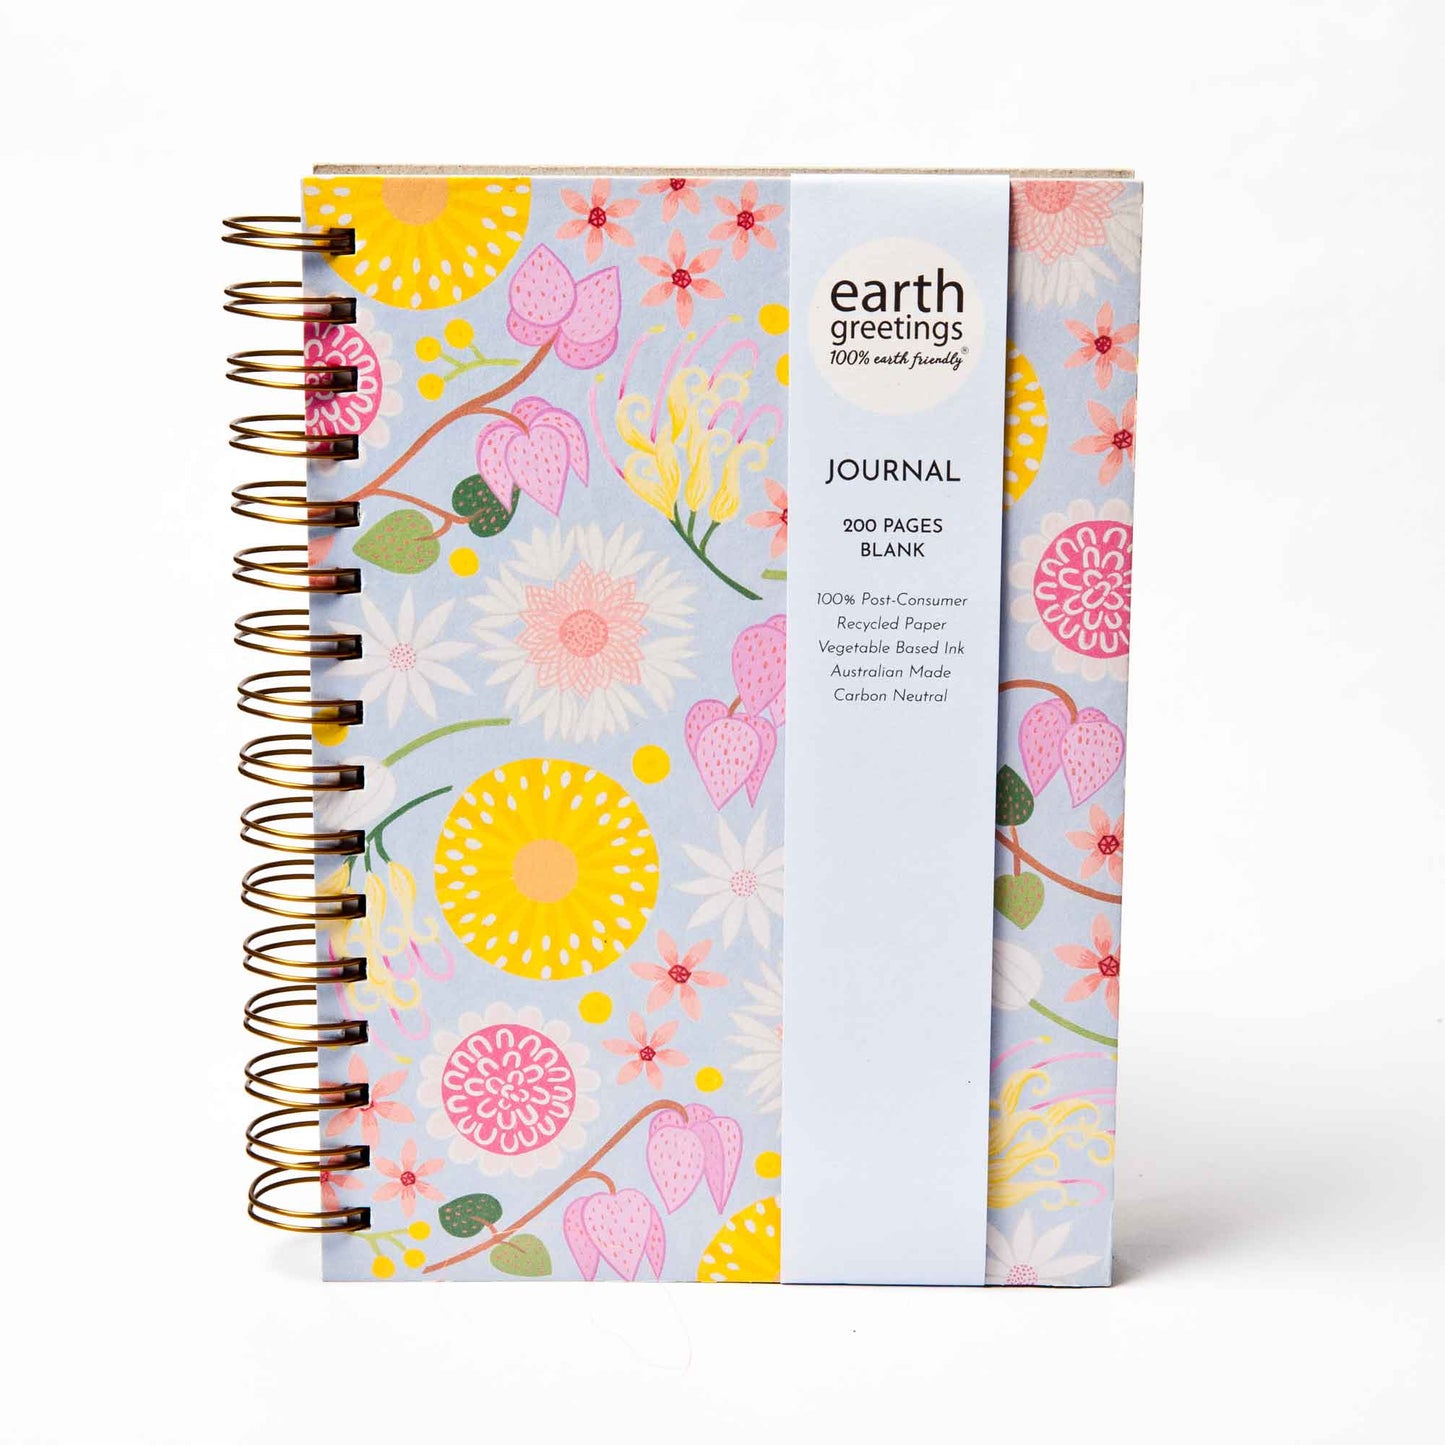 Earth Greetings Nature Inspired Journal with 100% Post-Consumer Recycled Paper